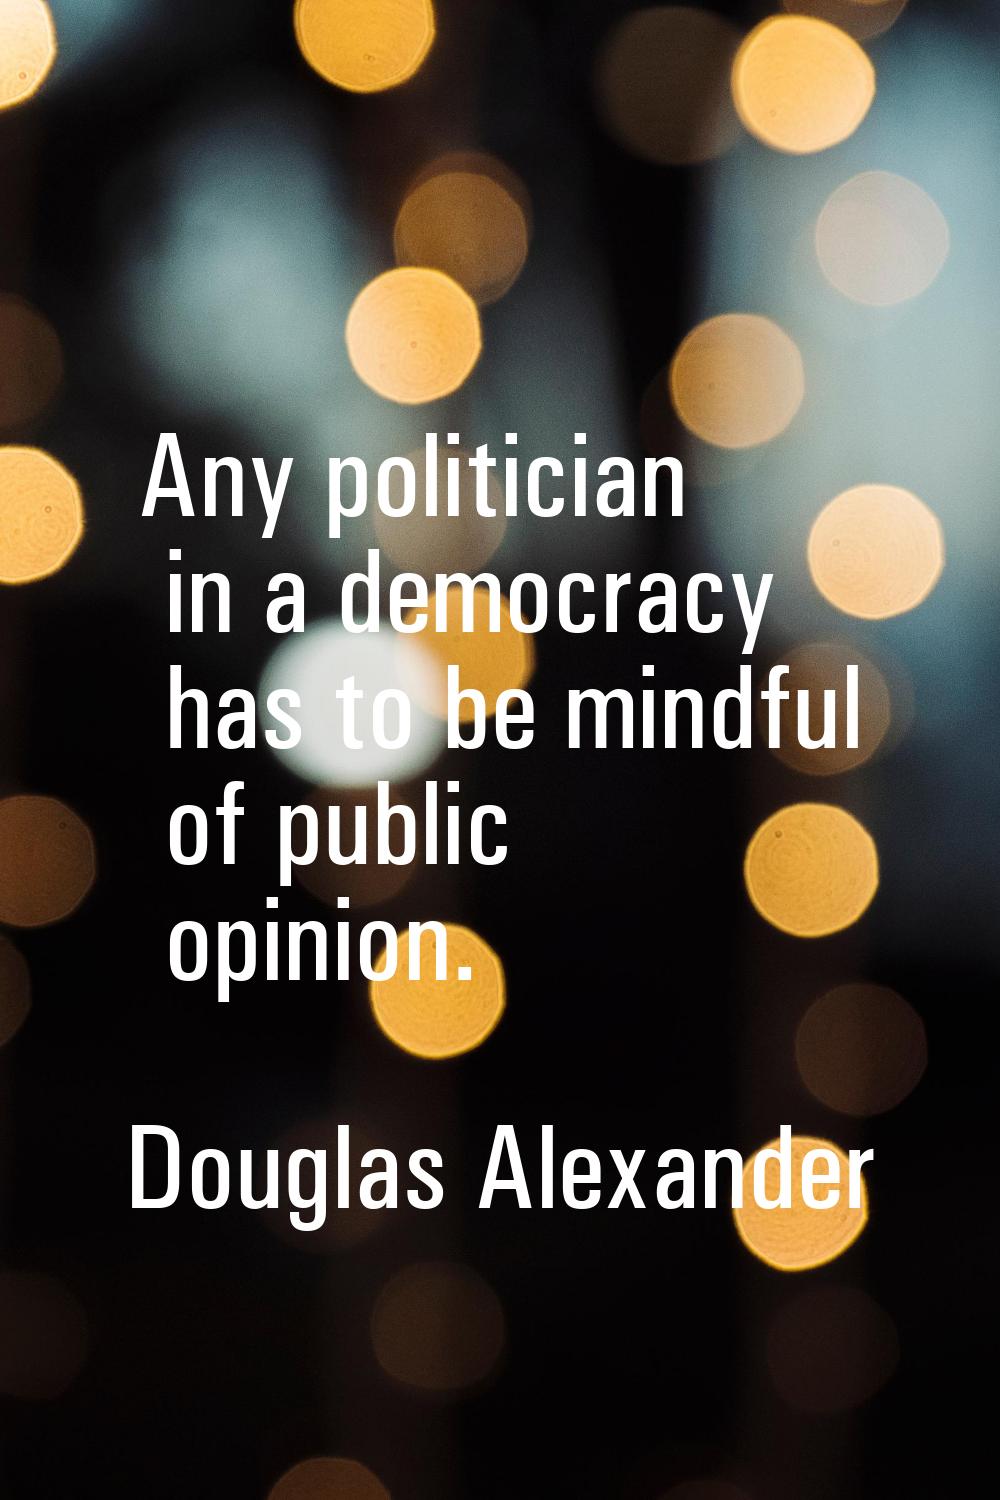 Any politician in a democracy has to be mindful of public opinion.